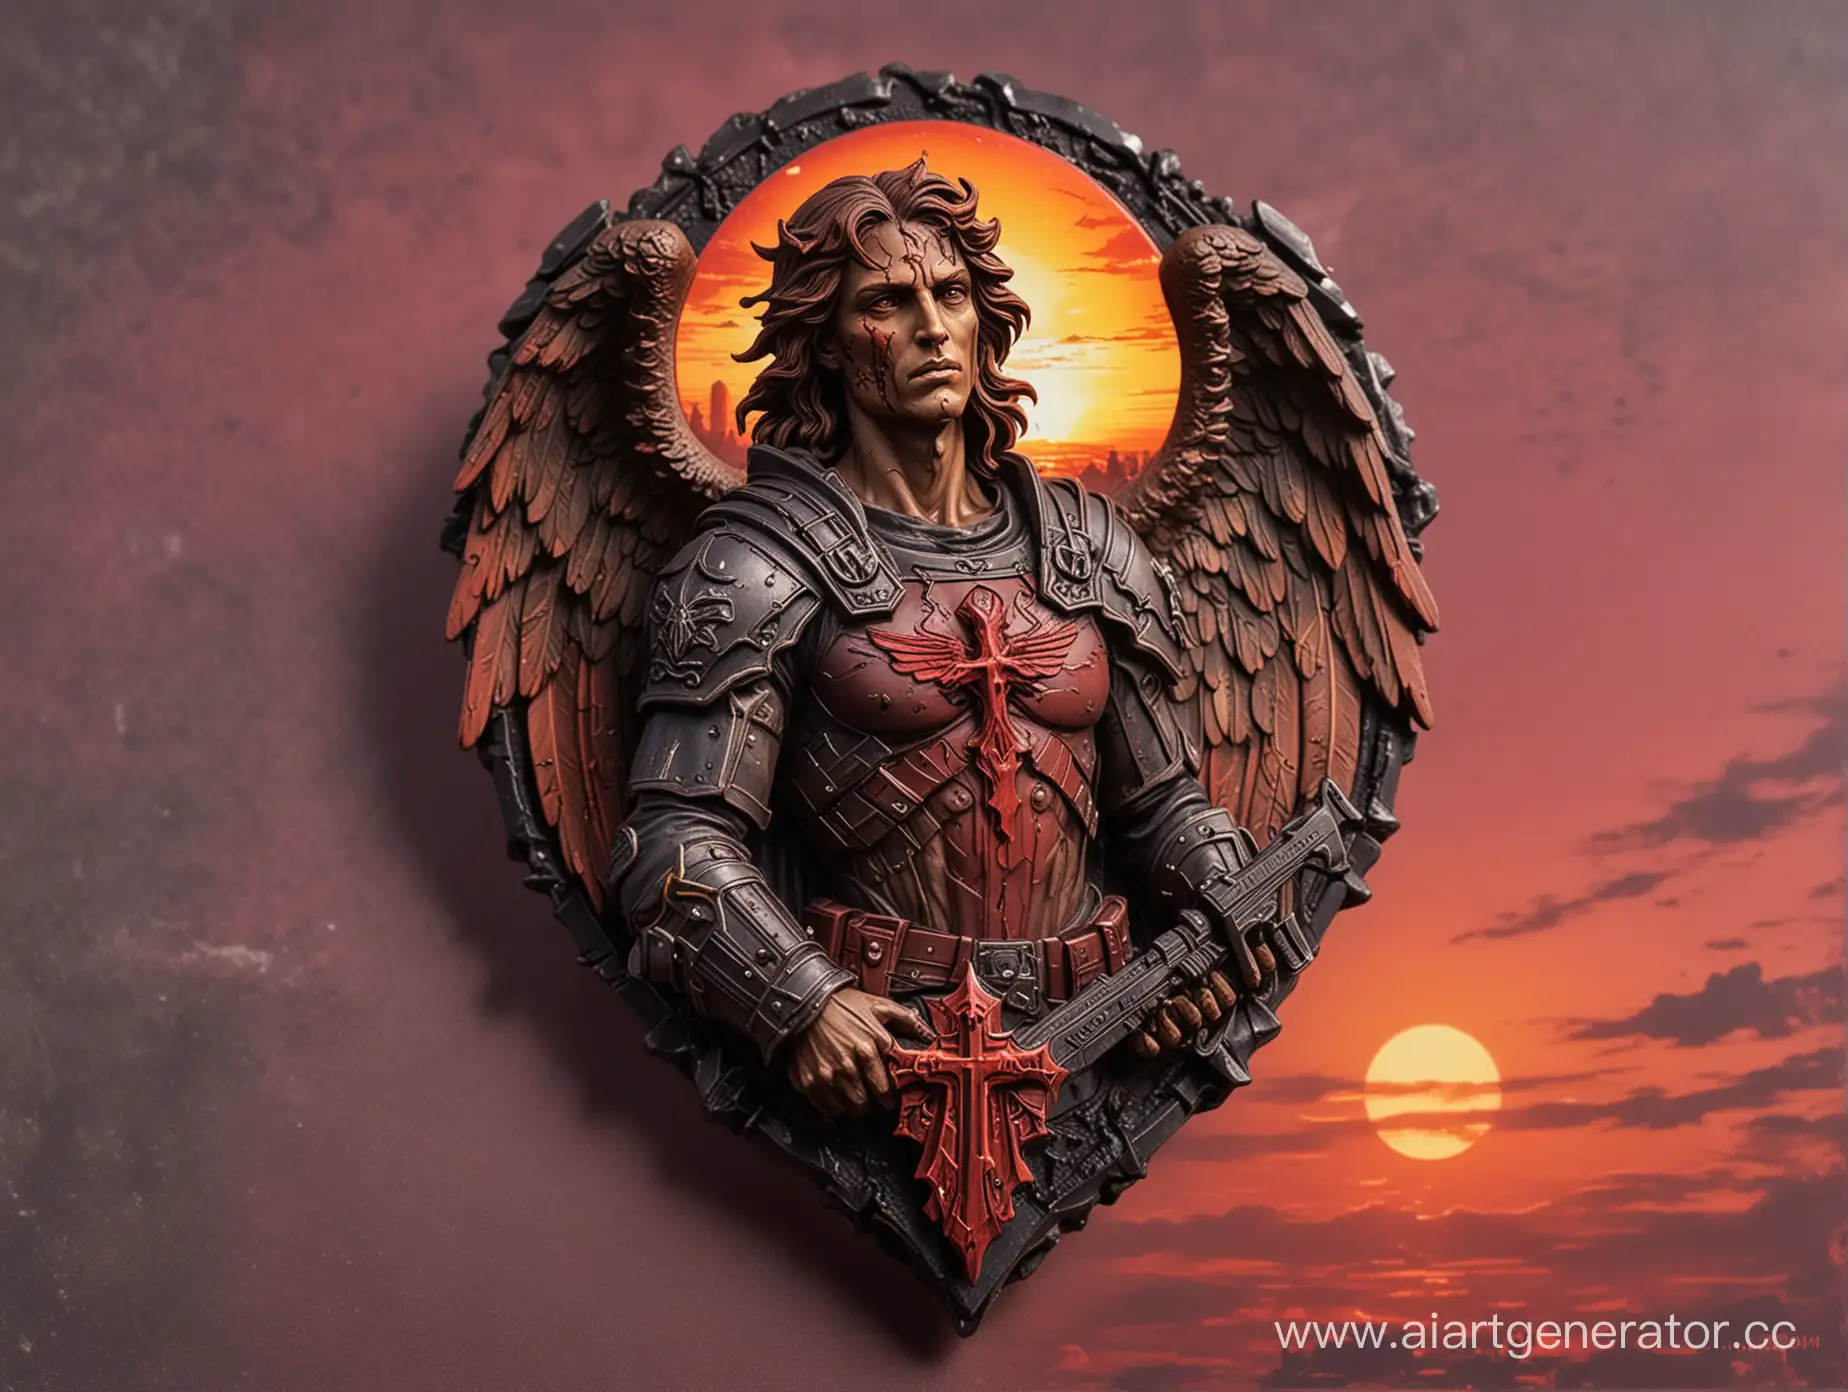 Mysterious-Bloodied-Archangel-with-DVS-Badge-on-Crimson-Sunset-Background